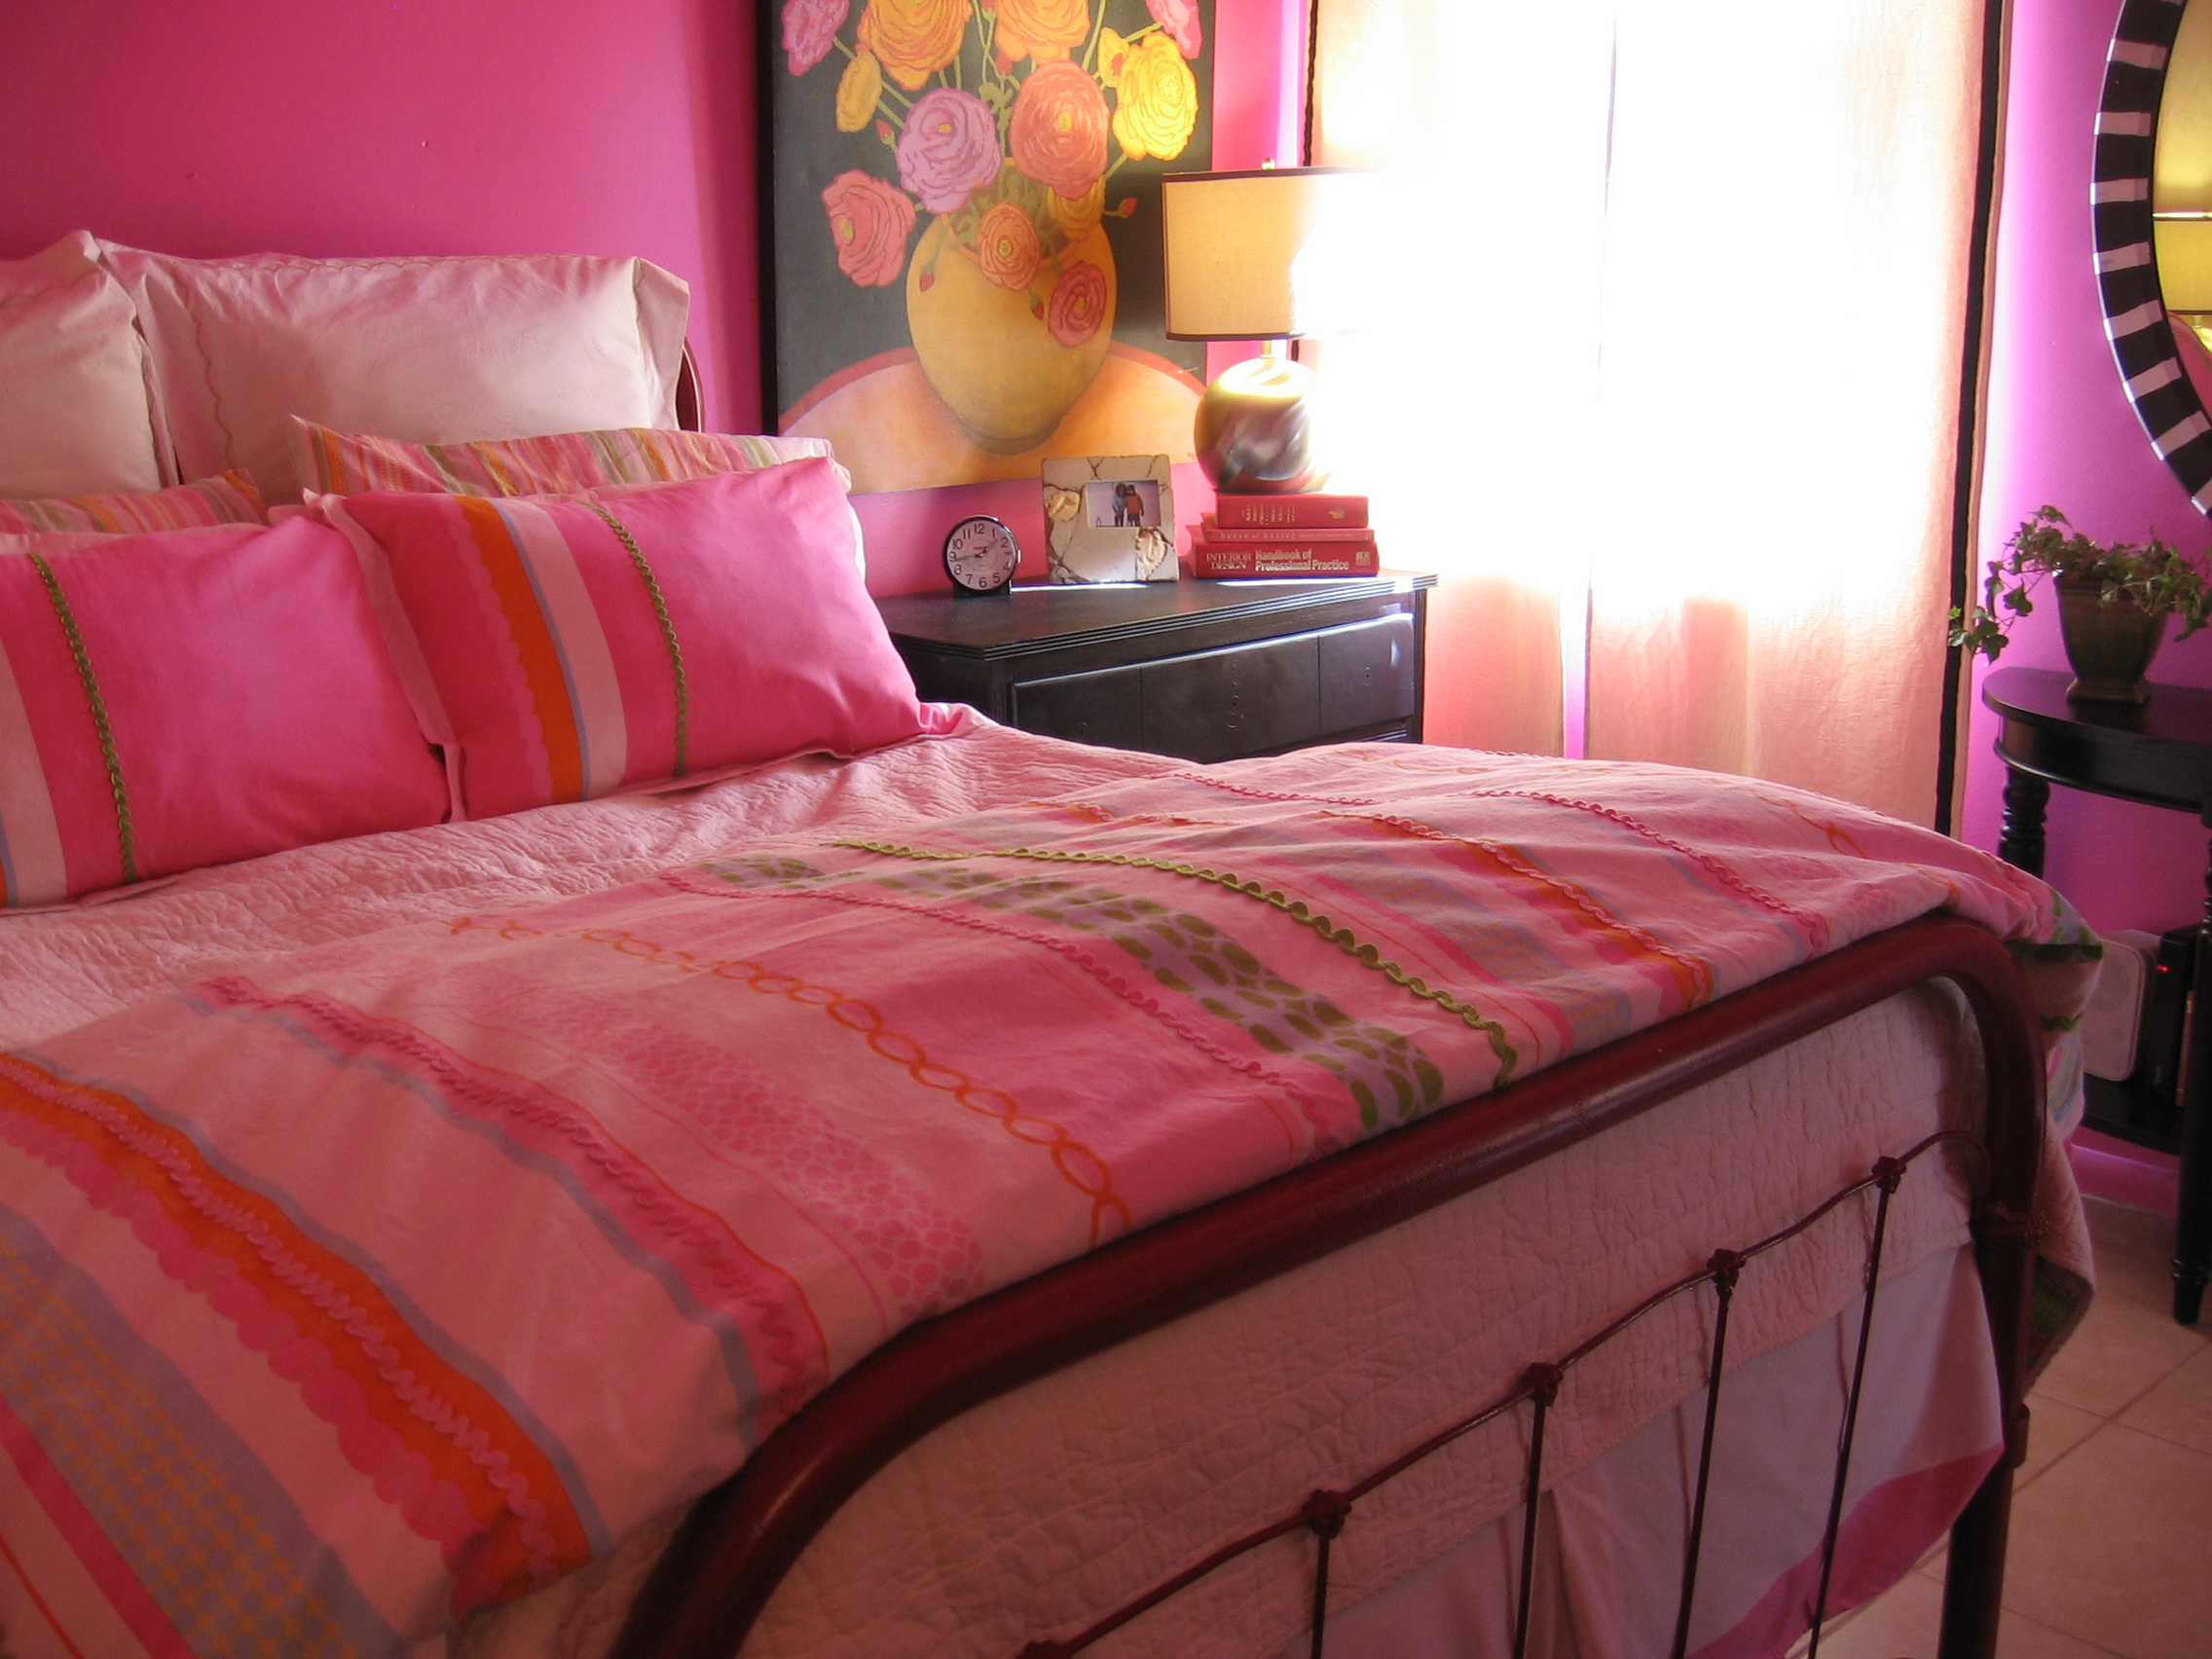 Pink bedroom by nolaclutterbusters, on Flickr